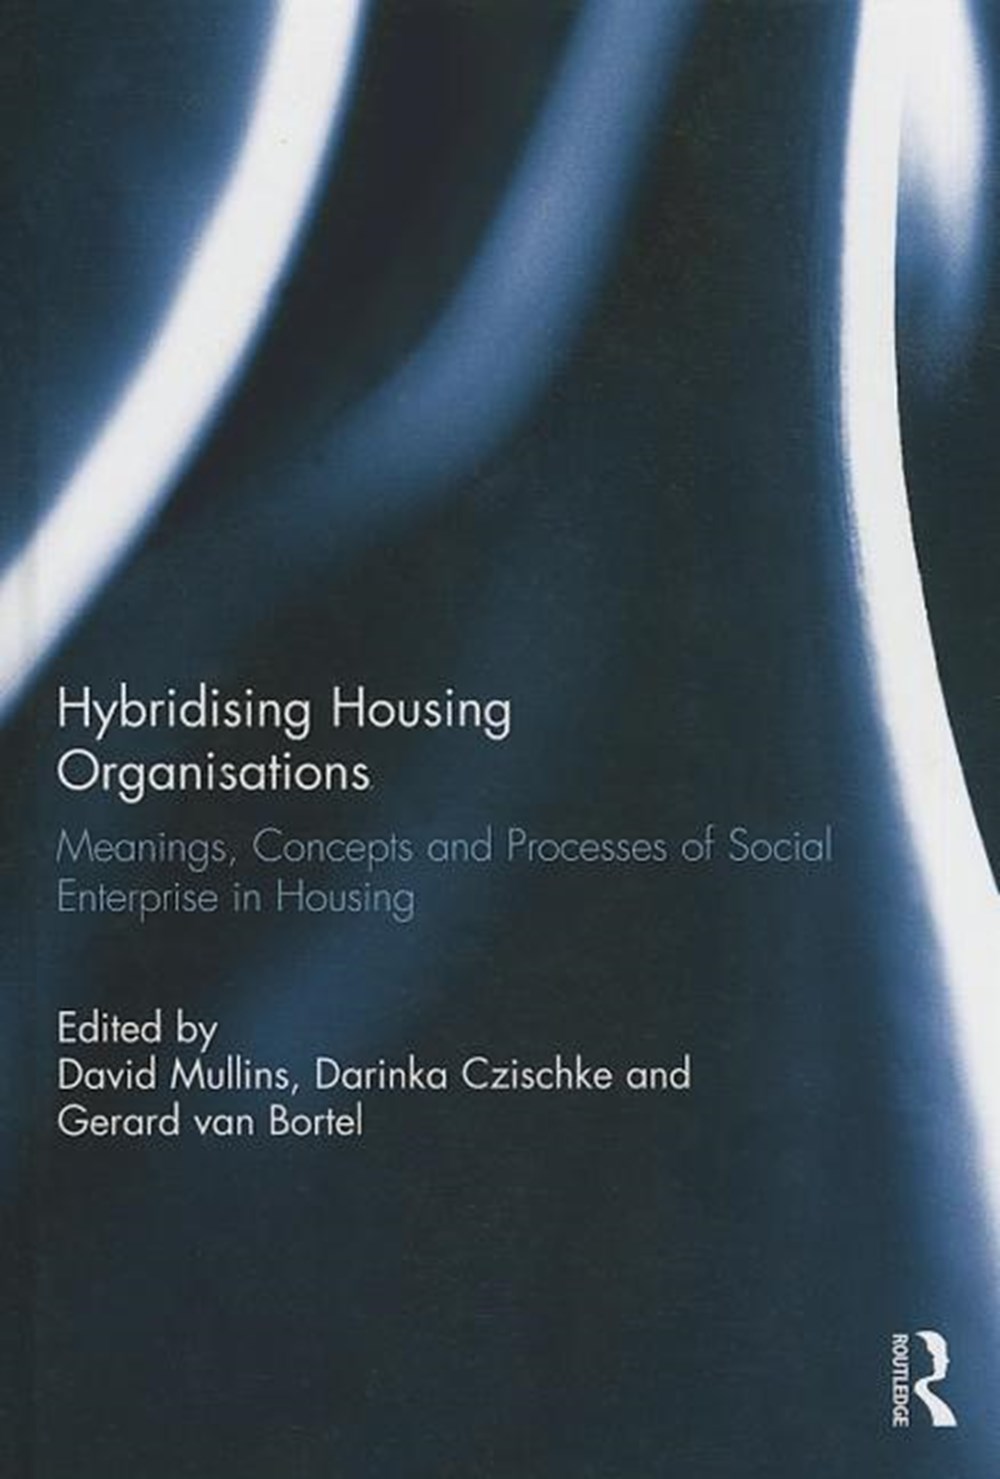 Hybridising Housing Organisations Meanings, Concepts and Processes of Social Enterprise in Housing